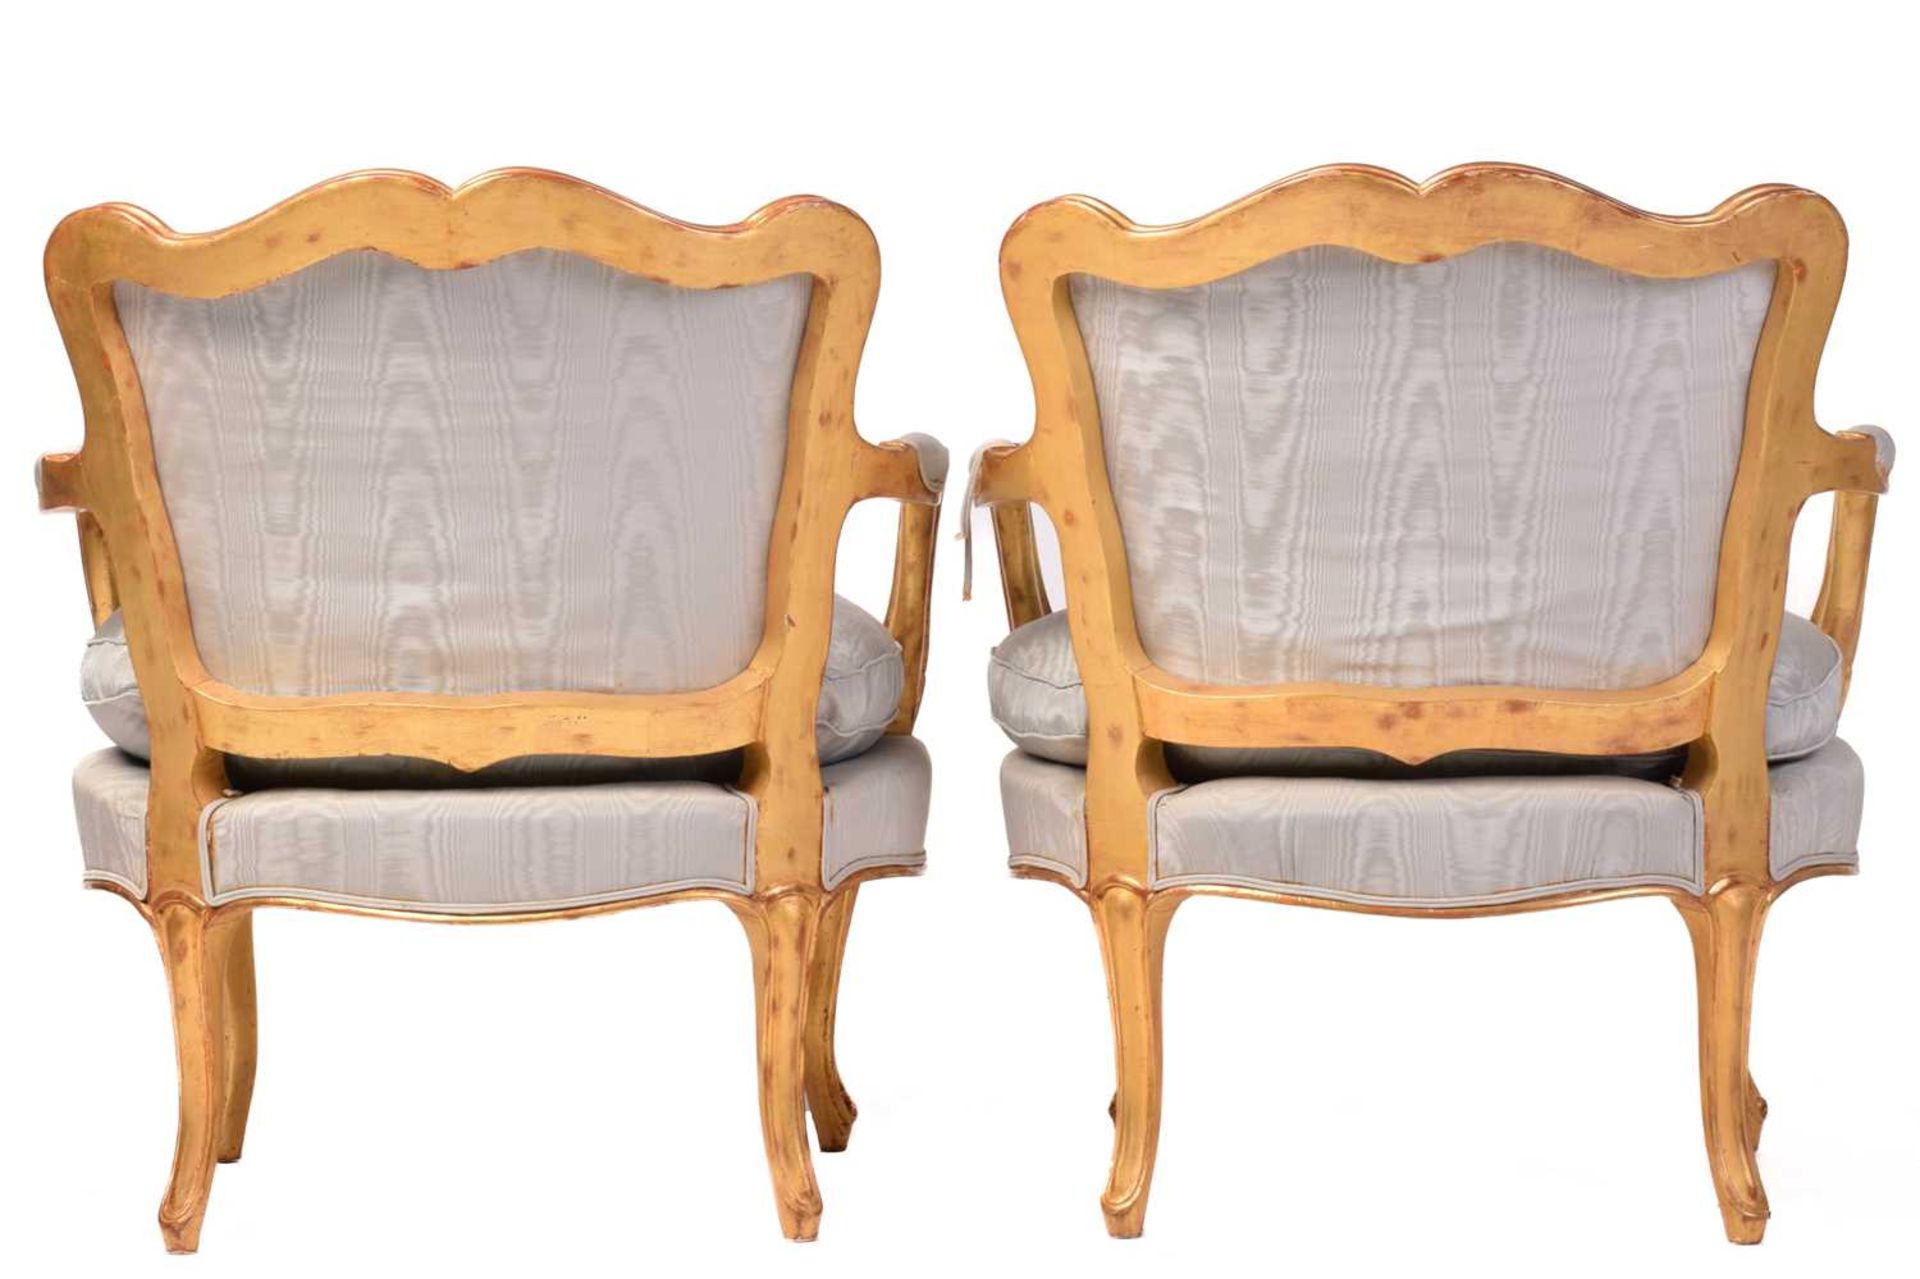 A pair of French Louis XV-style carved wood and gilt gesso fauteuils, 20th century with serpentine - Image 2 of 7